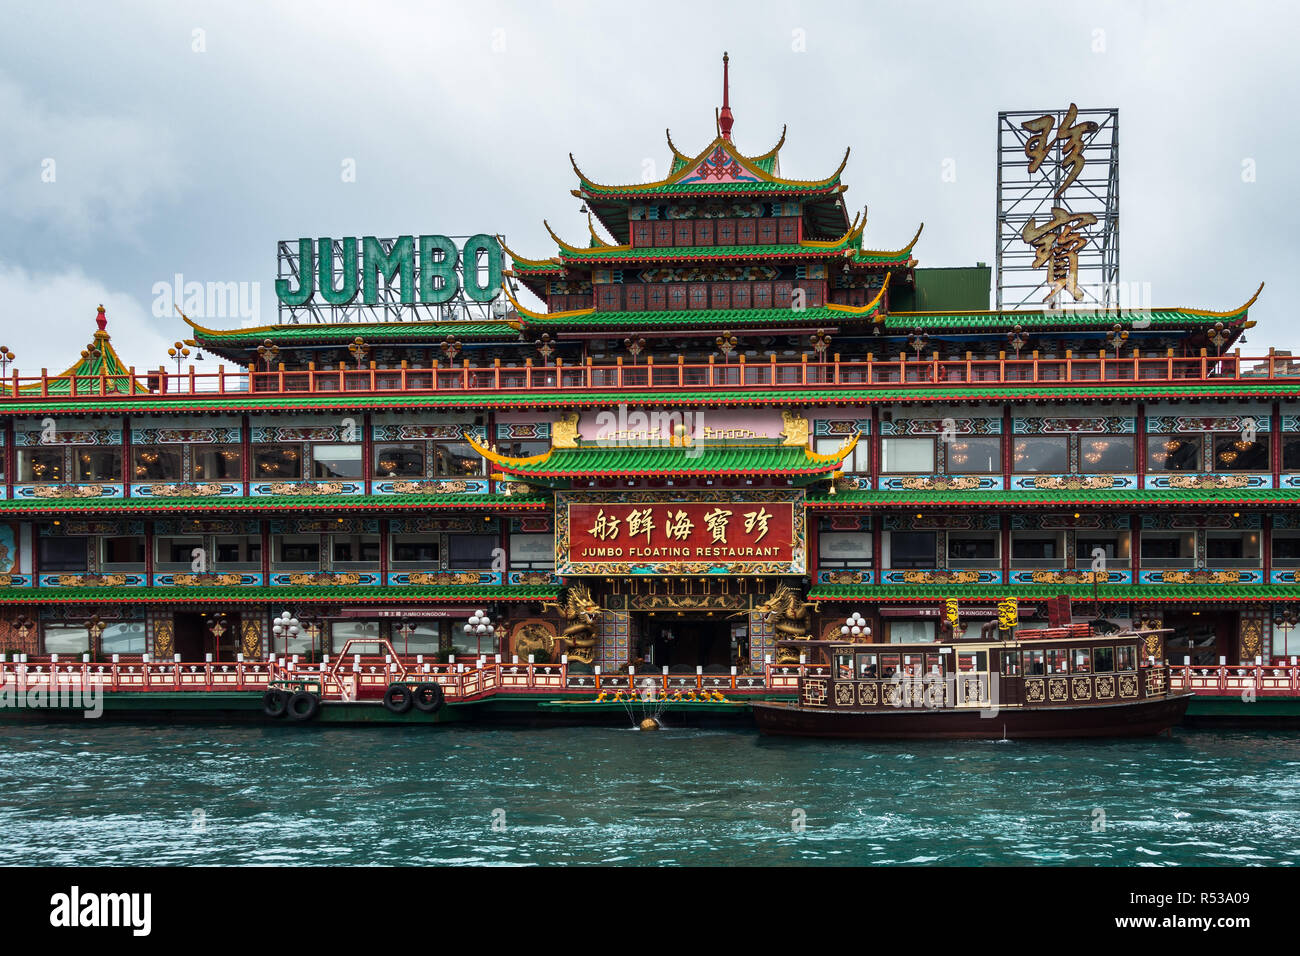 Jumbo Floating Restaurant is one of the most popular attraction in Hong Kong. Aberdeen, Hong Kong Island, Hong Kong, January 2018 Stock Photo